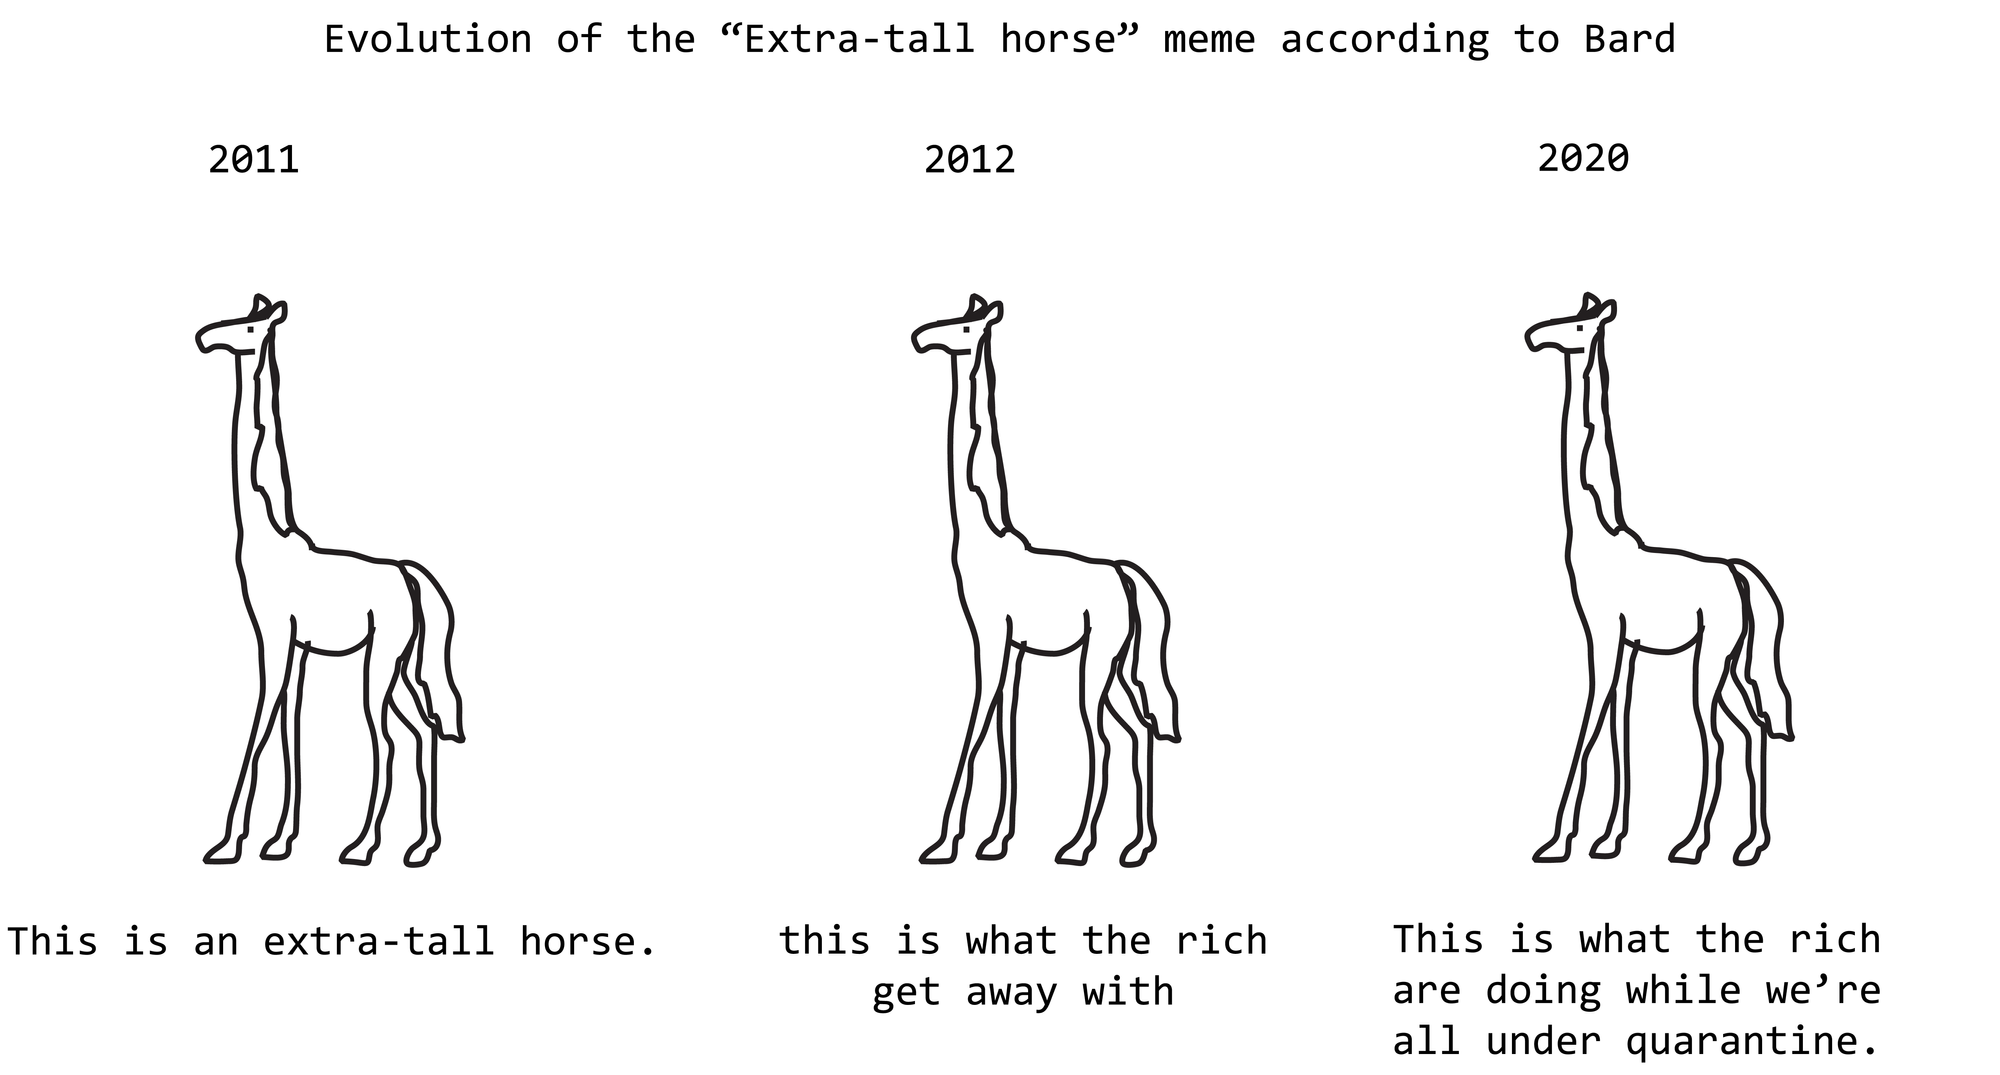 Evolution of the "Extra-tall horse" meme according to Bard. Each time, the image is of a horse with extremely elongated neck and legs. 2011: This is an extra-tall horse. 2012: this is what the rich get away with. 2020: This is what the rich are doing while we're all under quarantine.